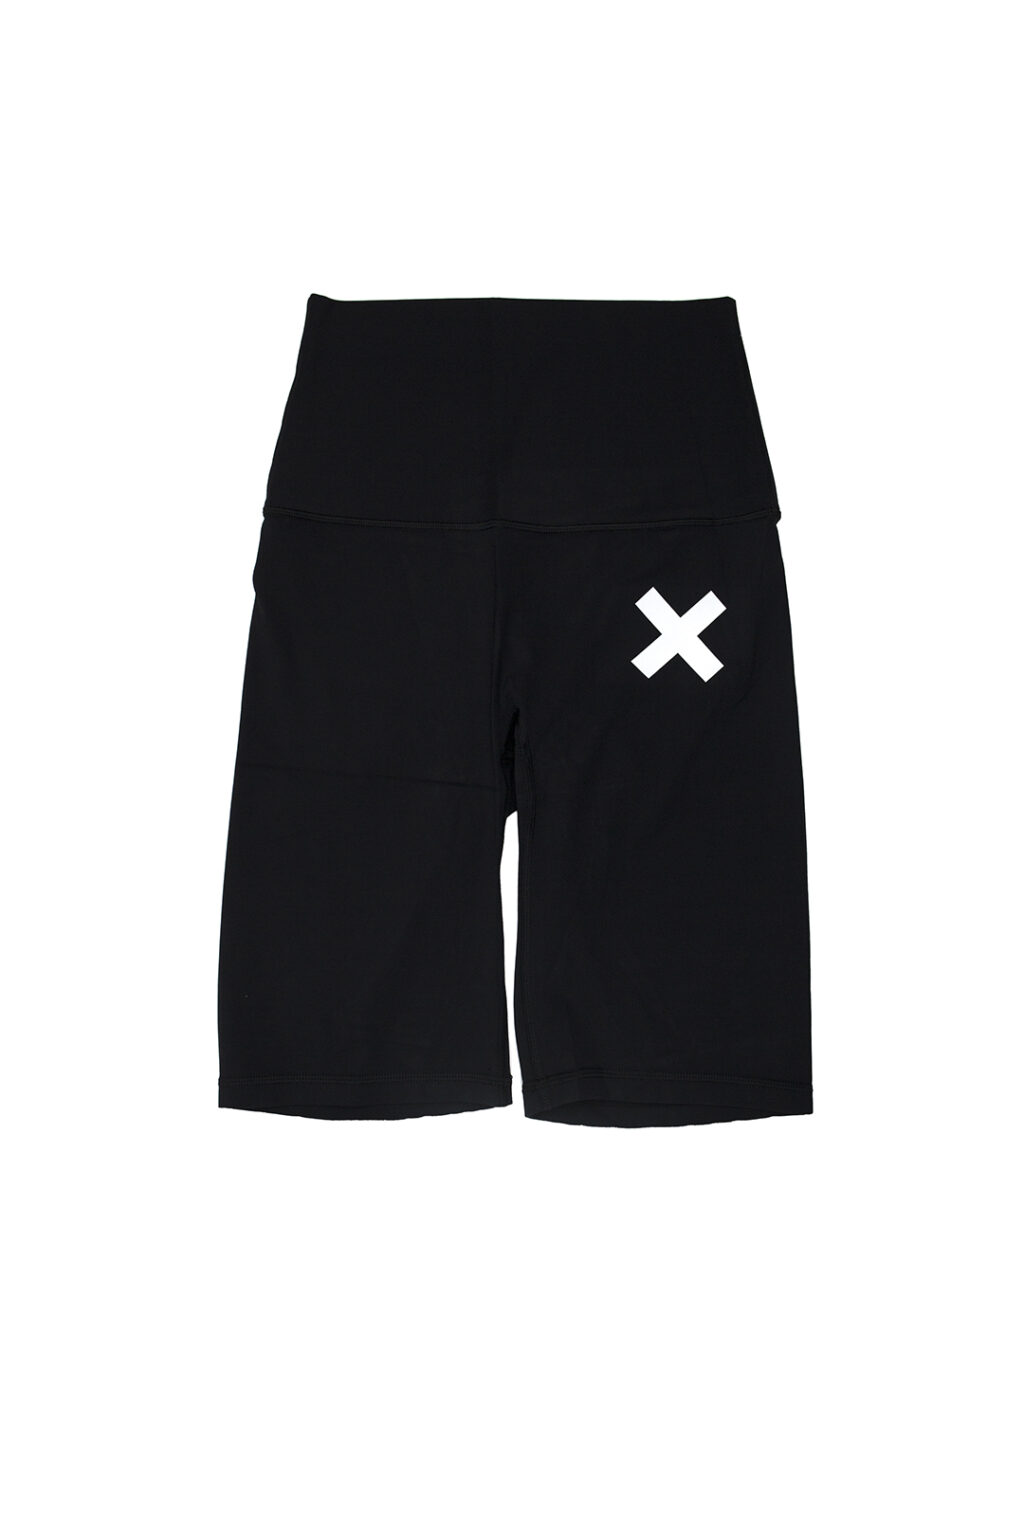 Time Out X Bike Shorts – Black – Front